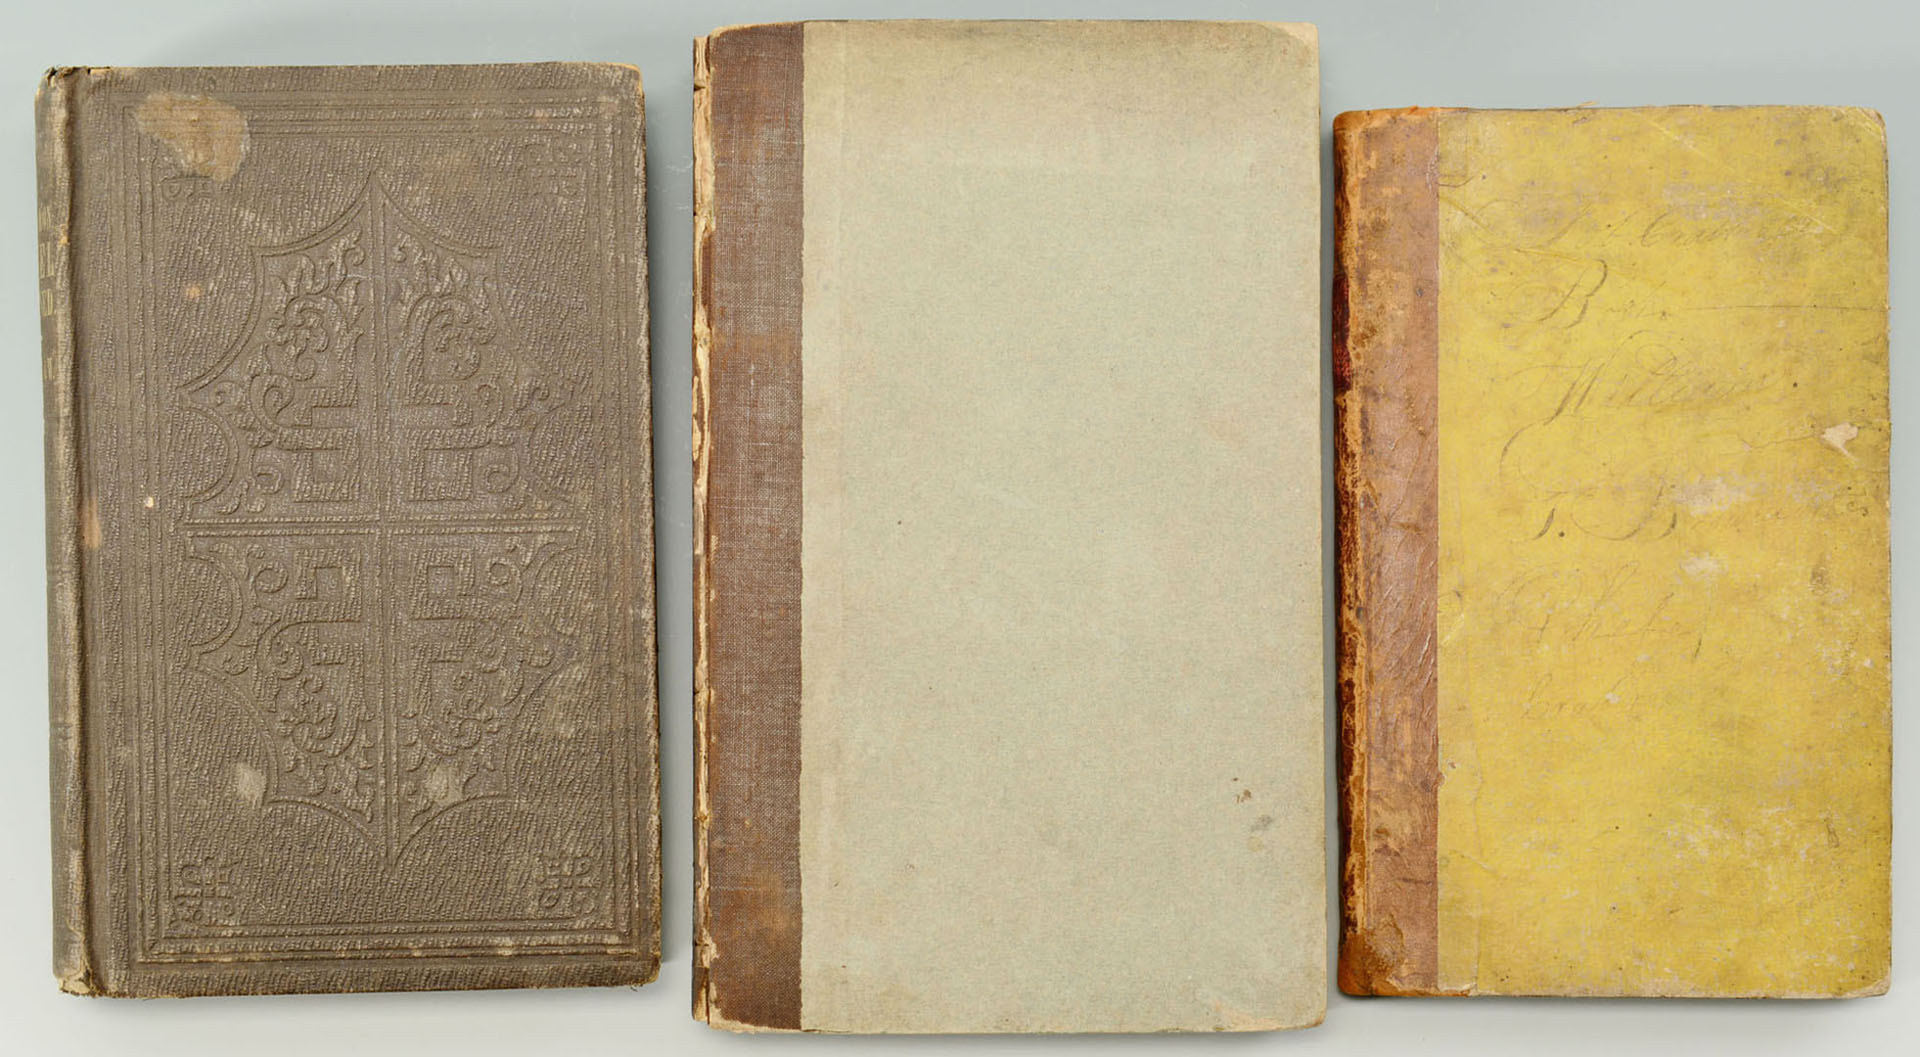 Lot 135: Early Brownlow Document and 3 Brownlow books, TN G